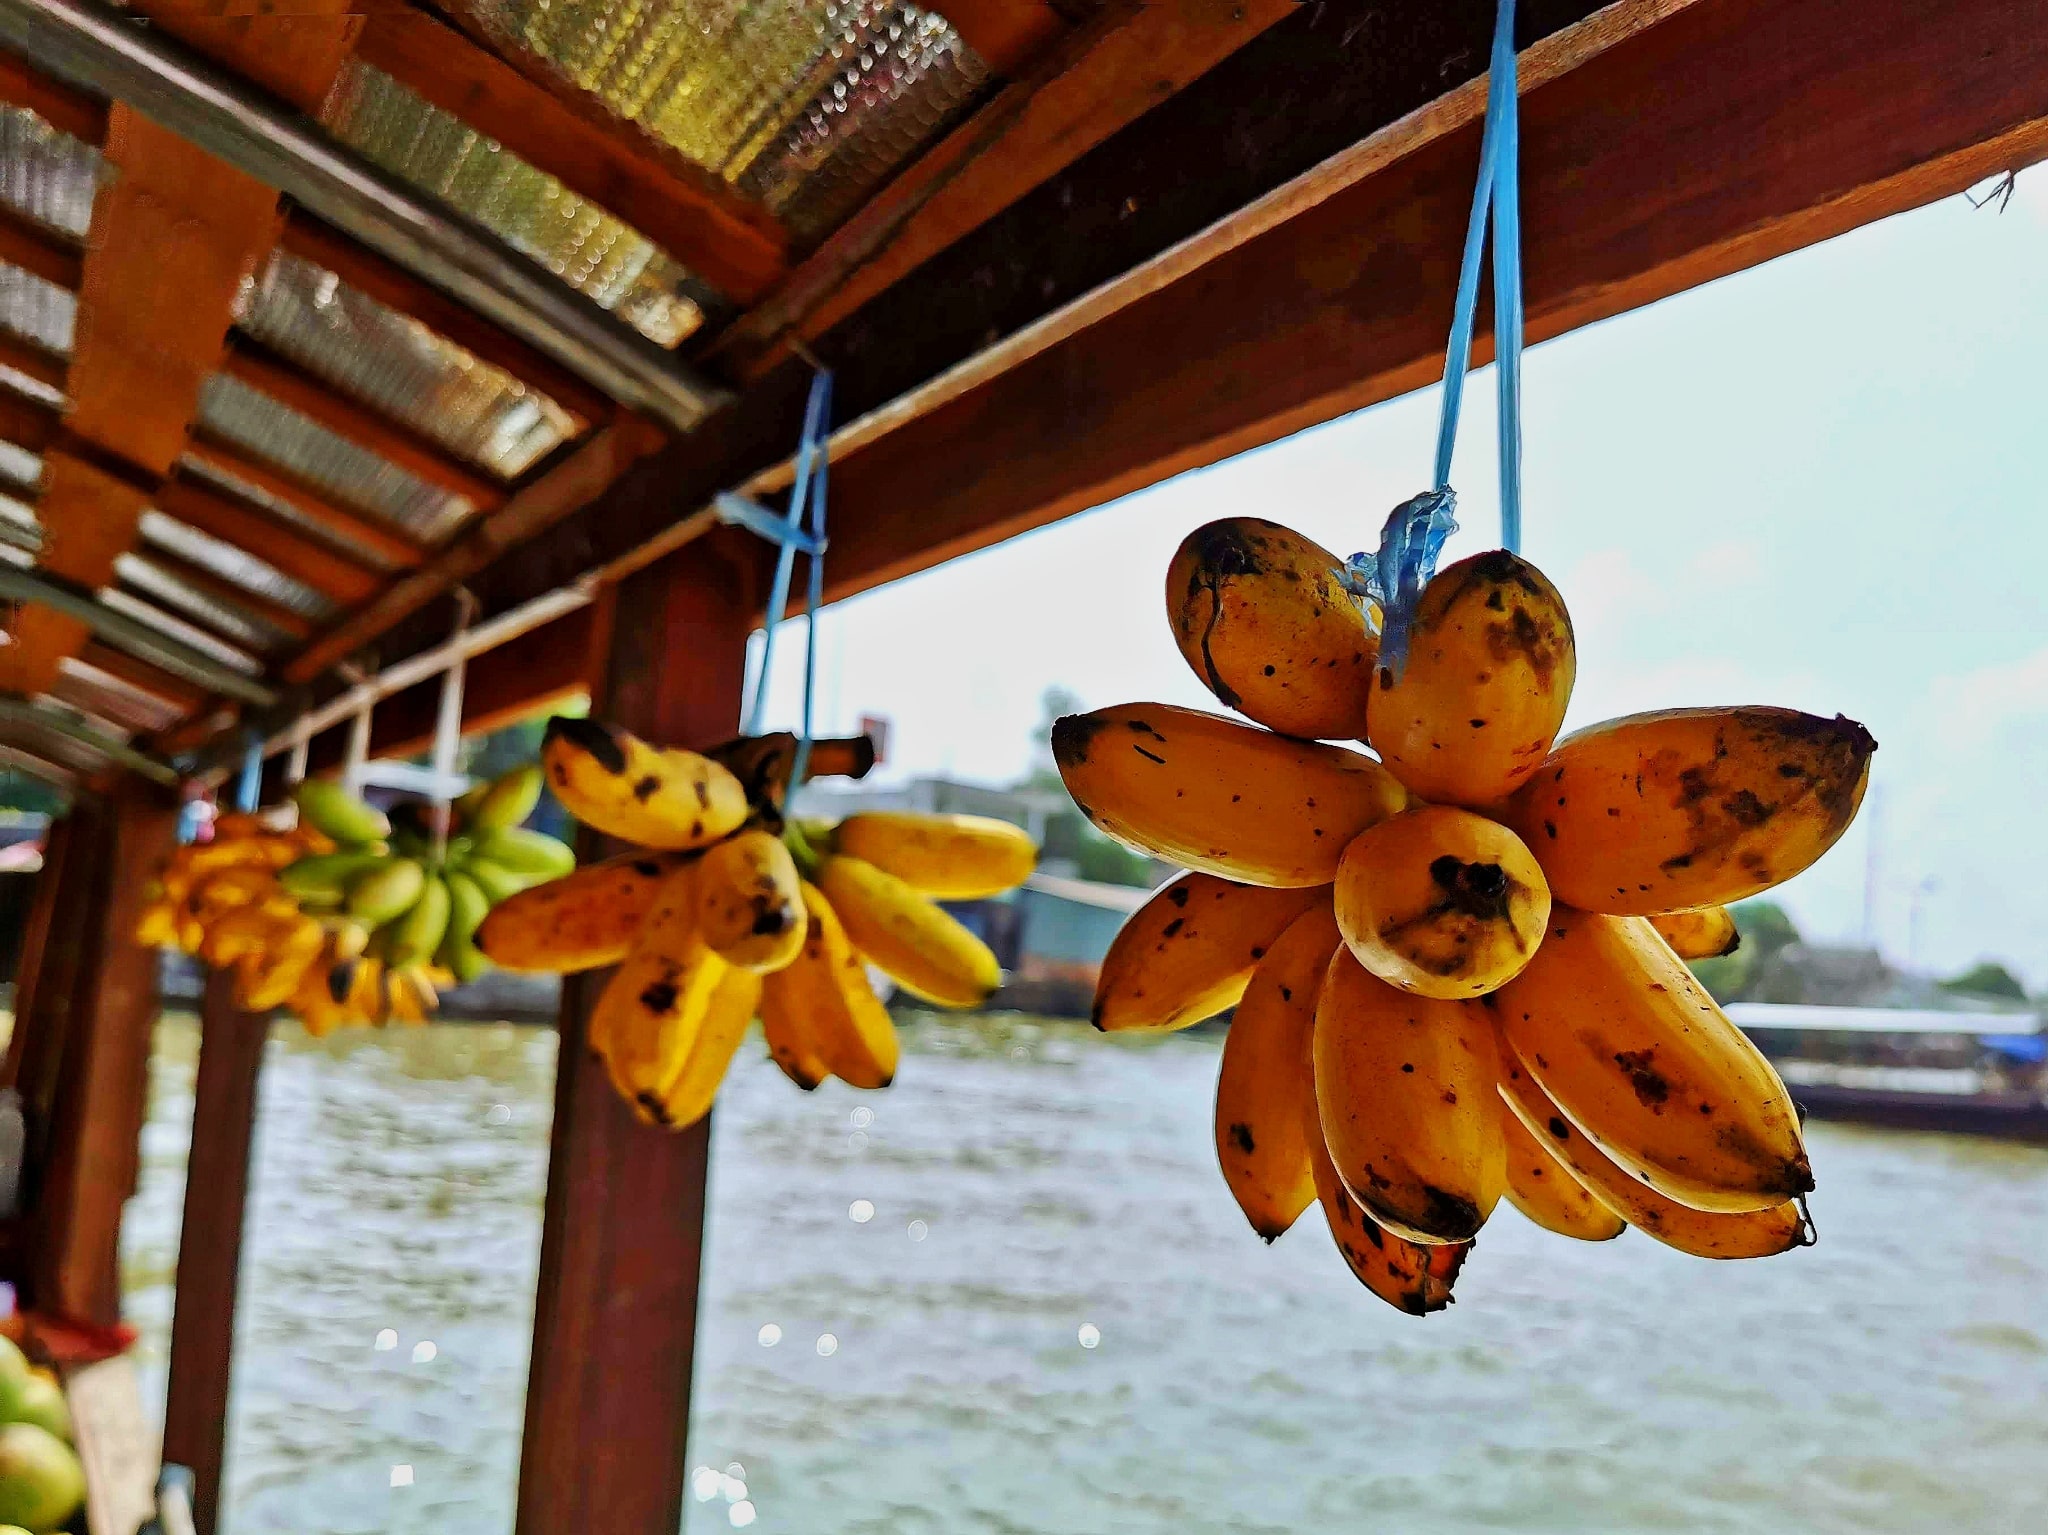 MK02:  CAI BE FLOATING MARKET- MEKONG ONE DAY TOUR -